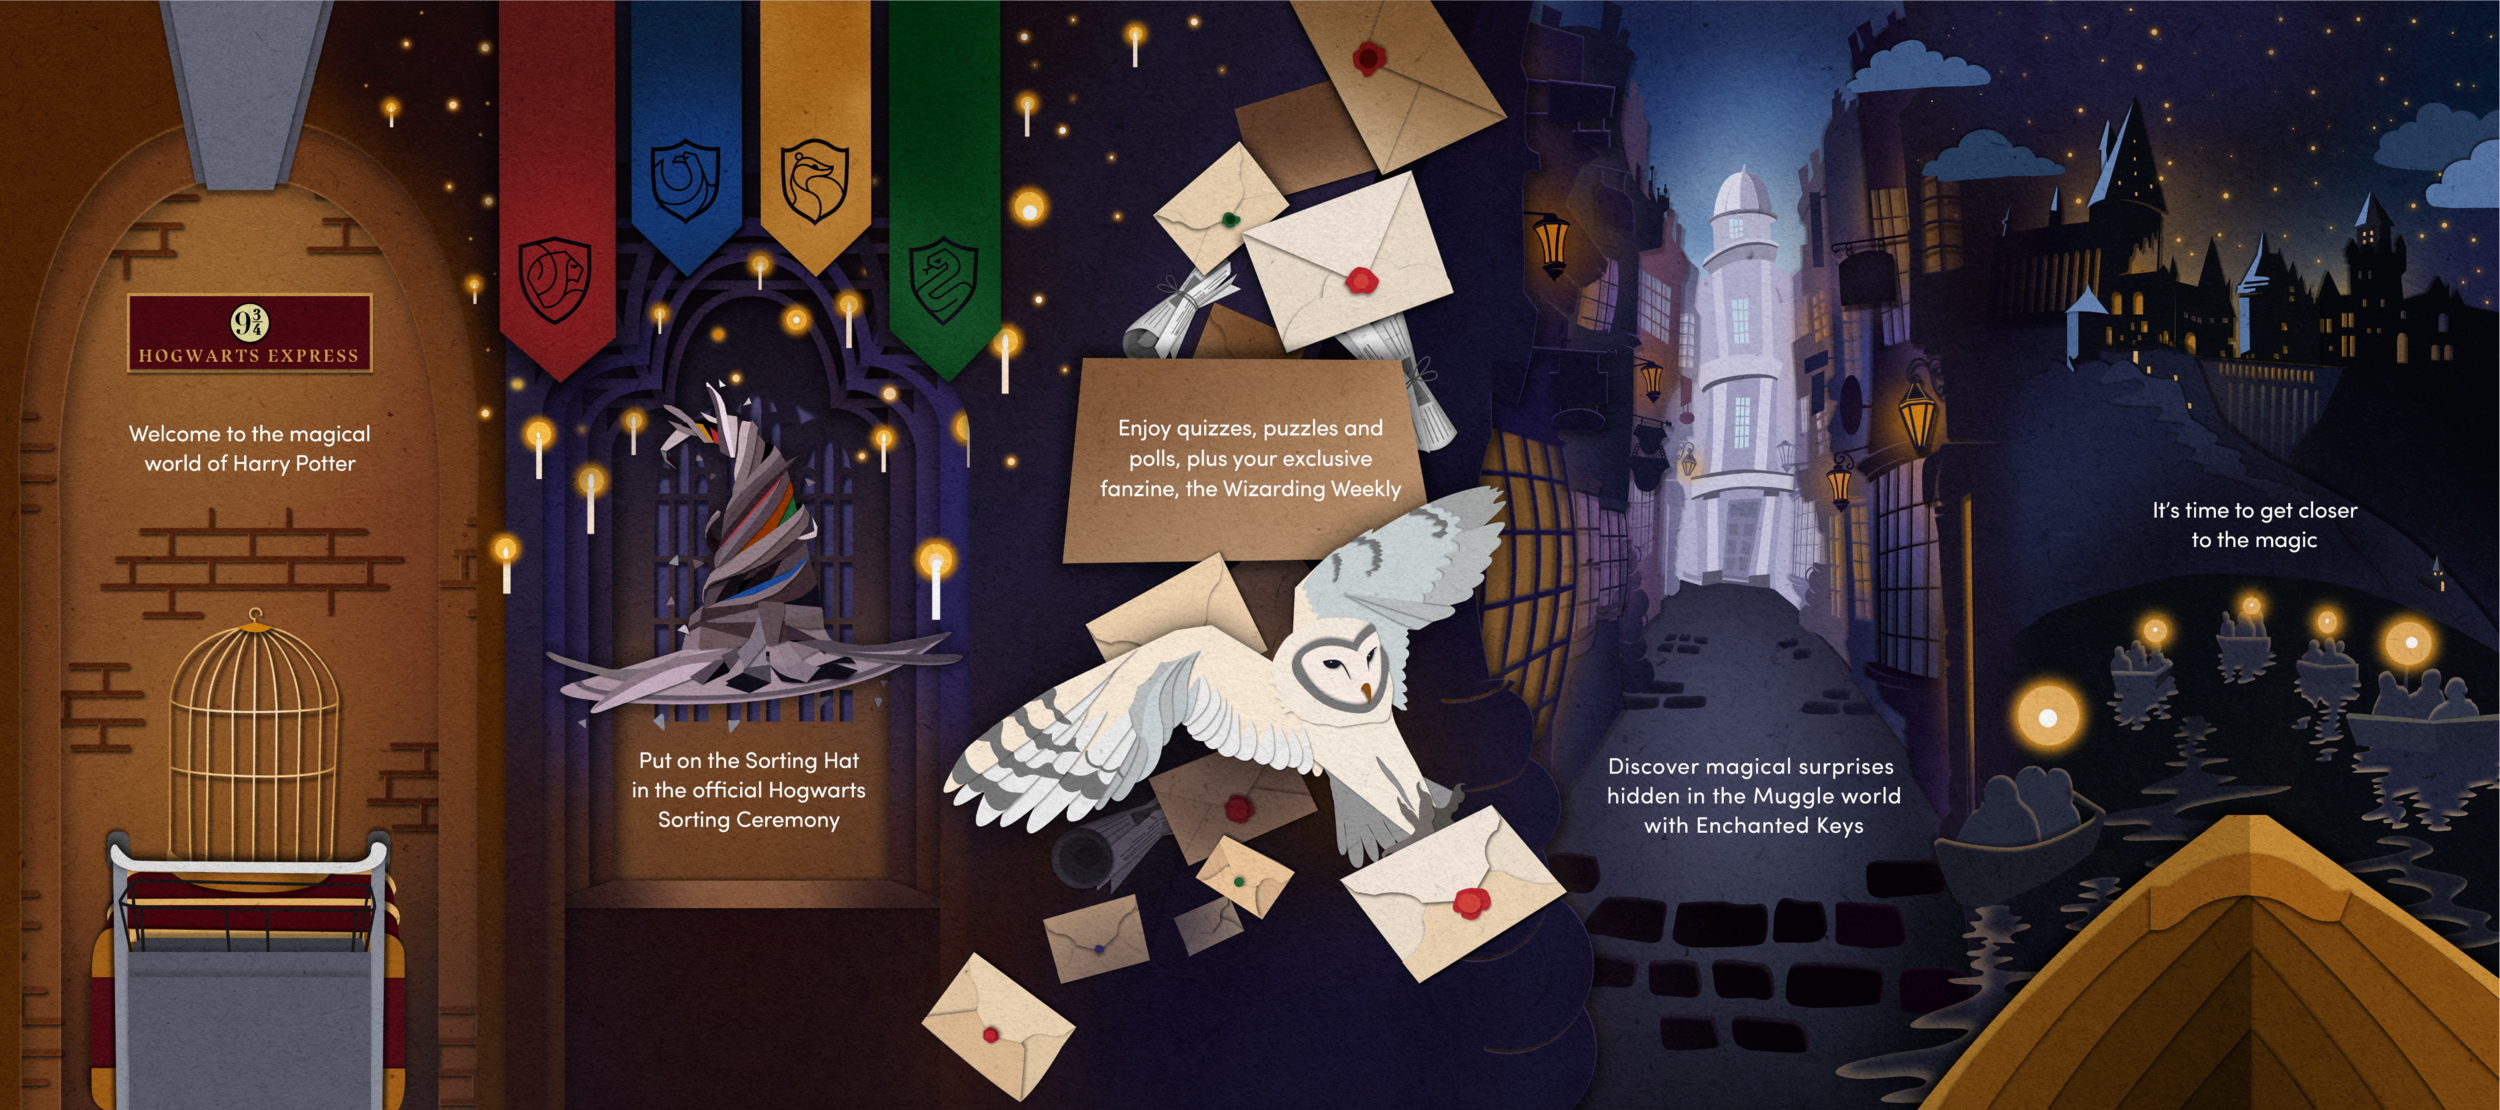 Wizarding World Digital Announces Official Harry Potter Fan Club and New  Hogwarts Sorting Ceremony -  «